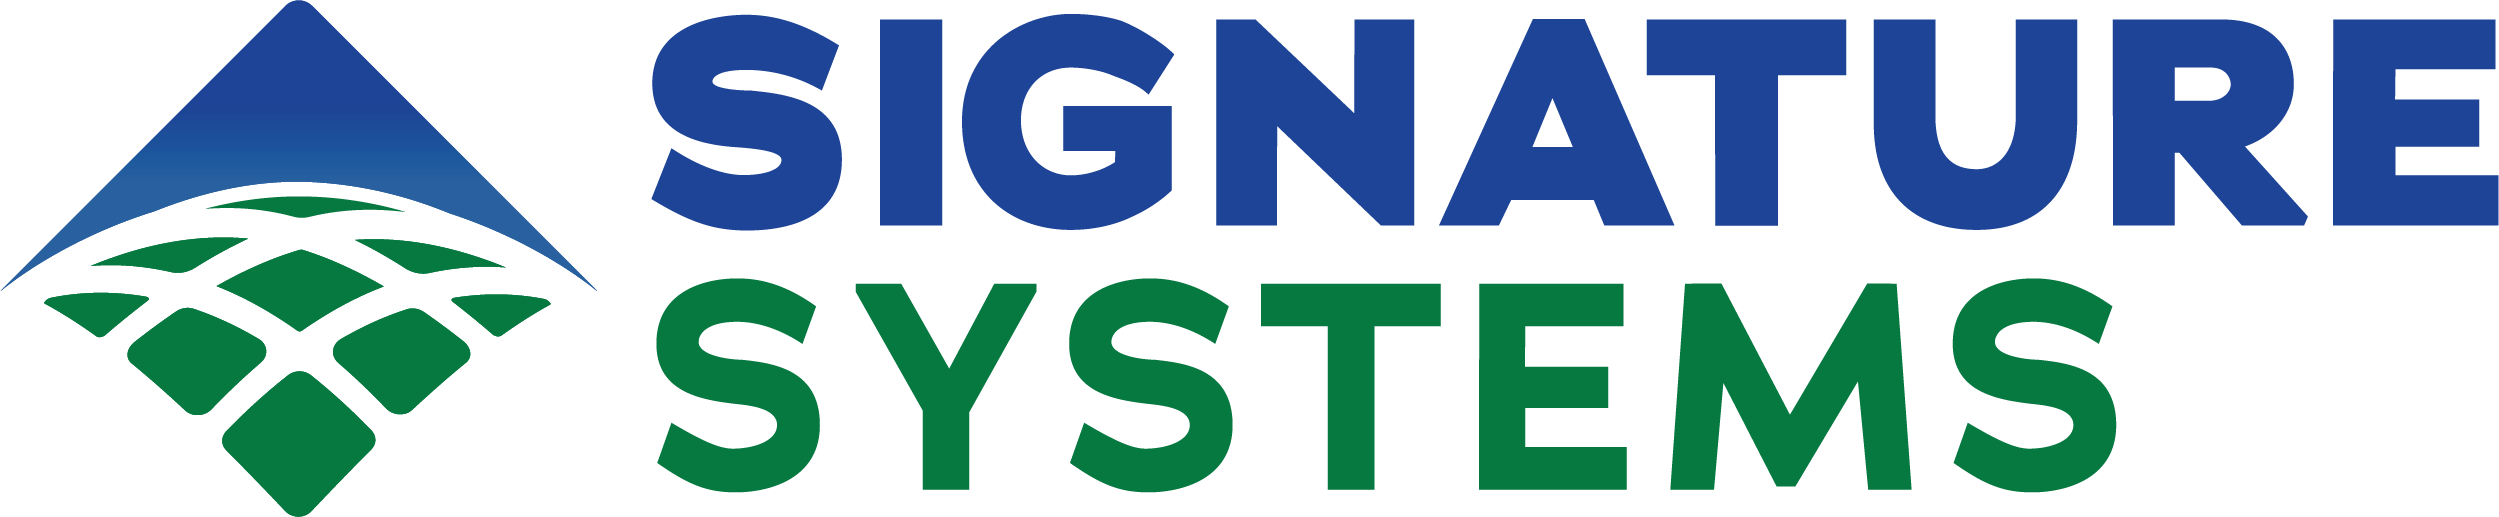 Signature Systems